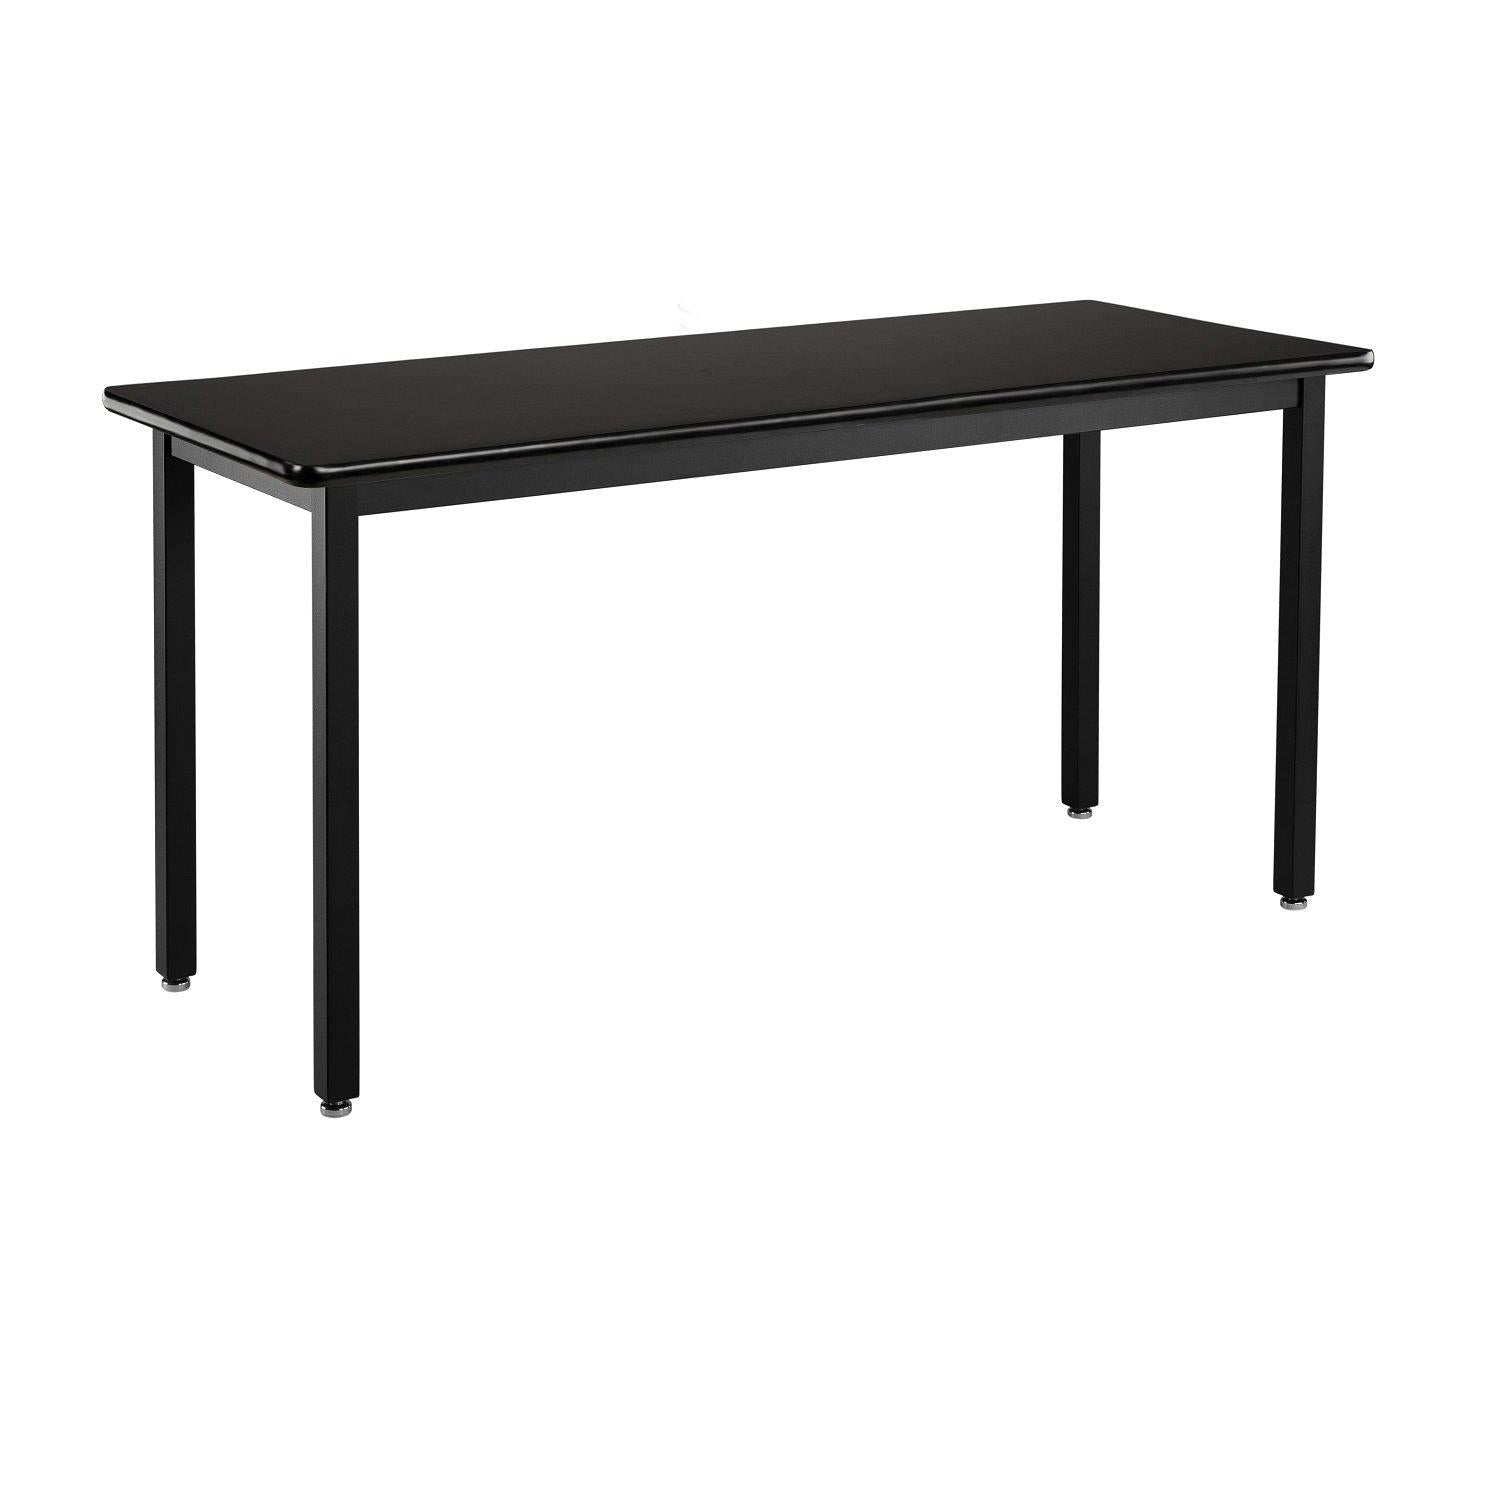 Heavy-Duty Fixed Height Utility Table, Black Frame, 30" x 48", High-Pressure Laminate Top with T-Mold Edge